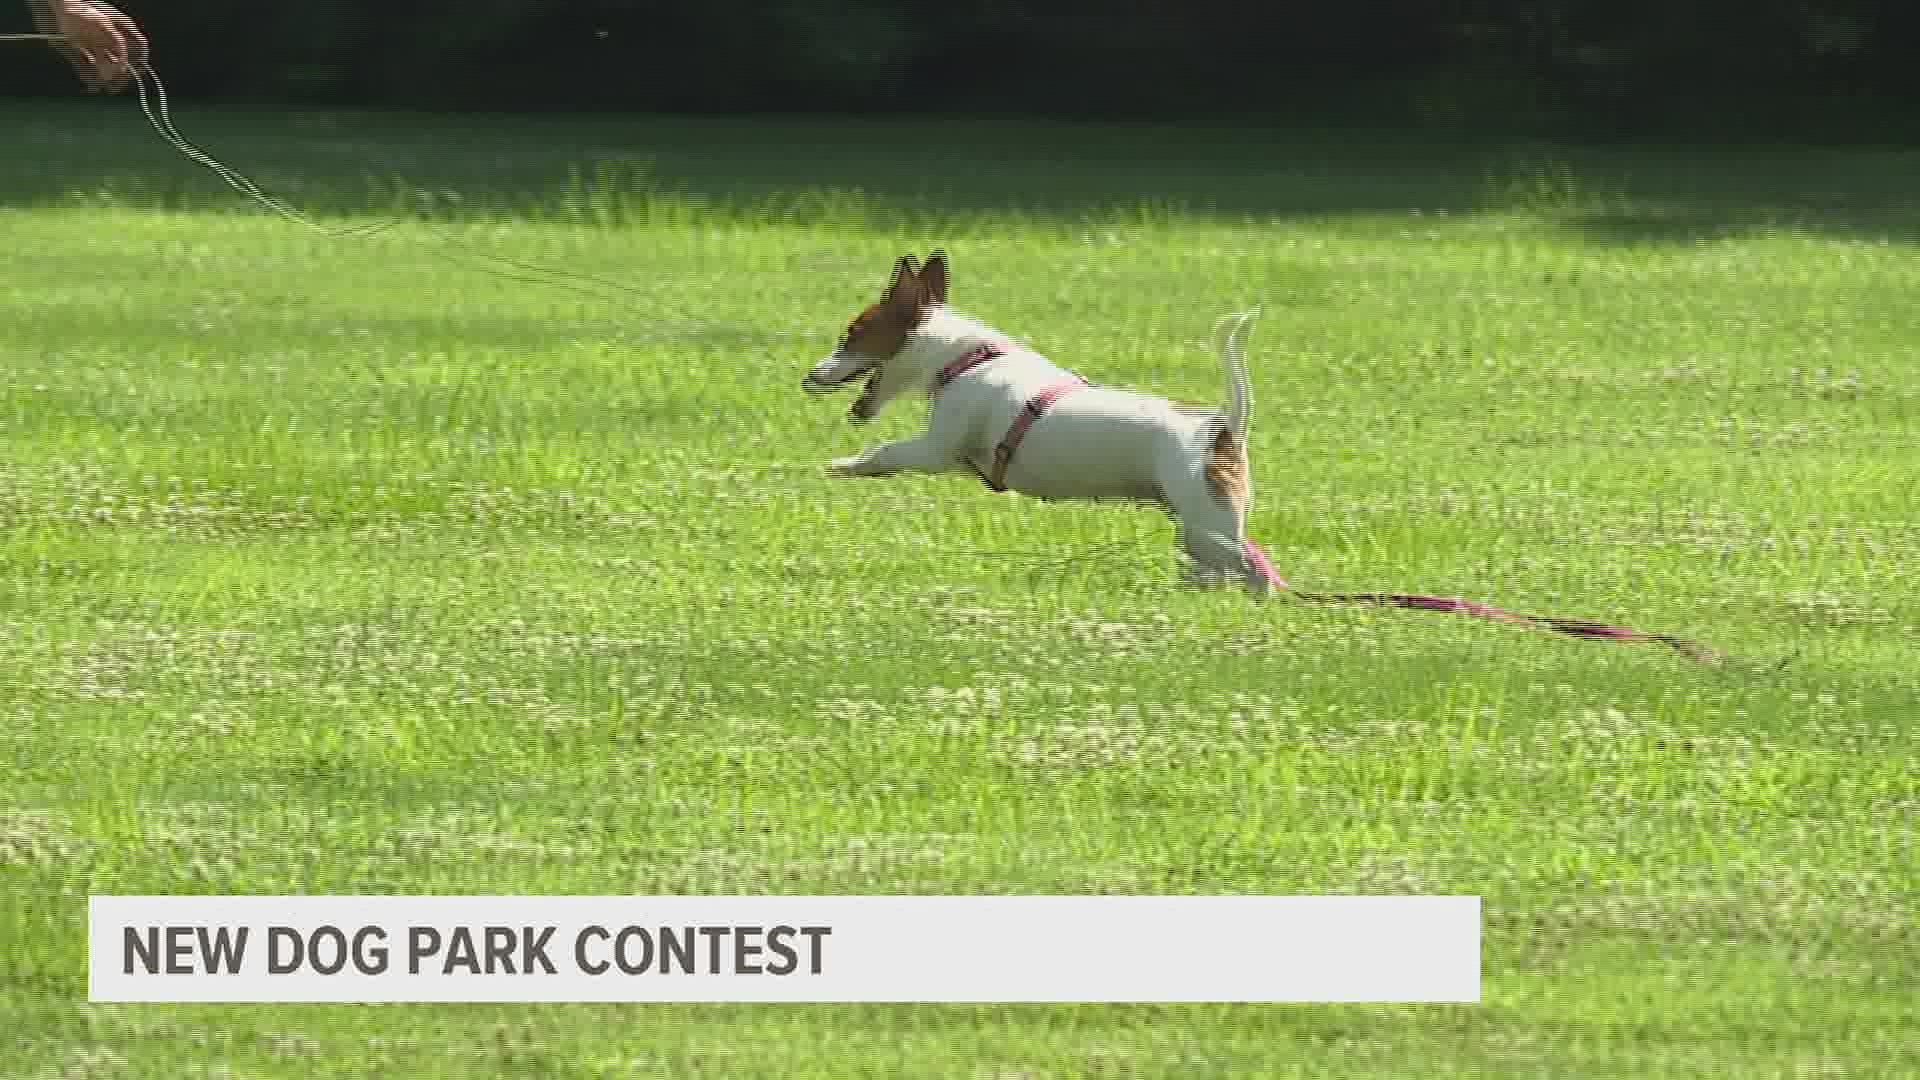 Four communities will receive $25,000 to build a dog park through the contest. The winners will be decided by votes, and Ephrata wants your help.